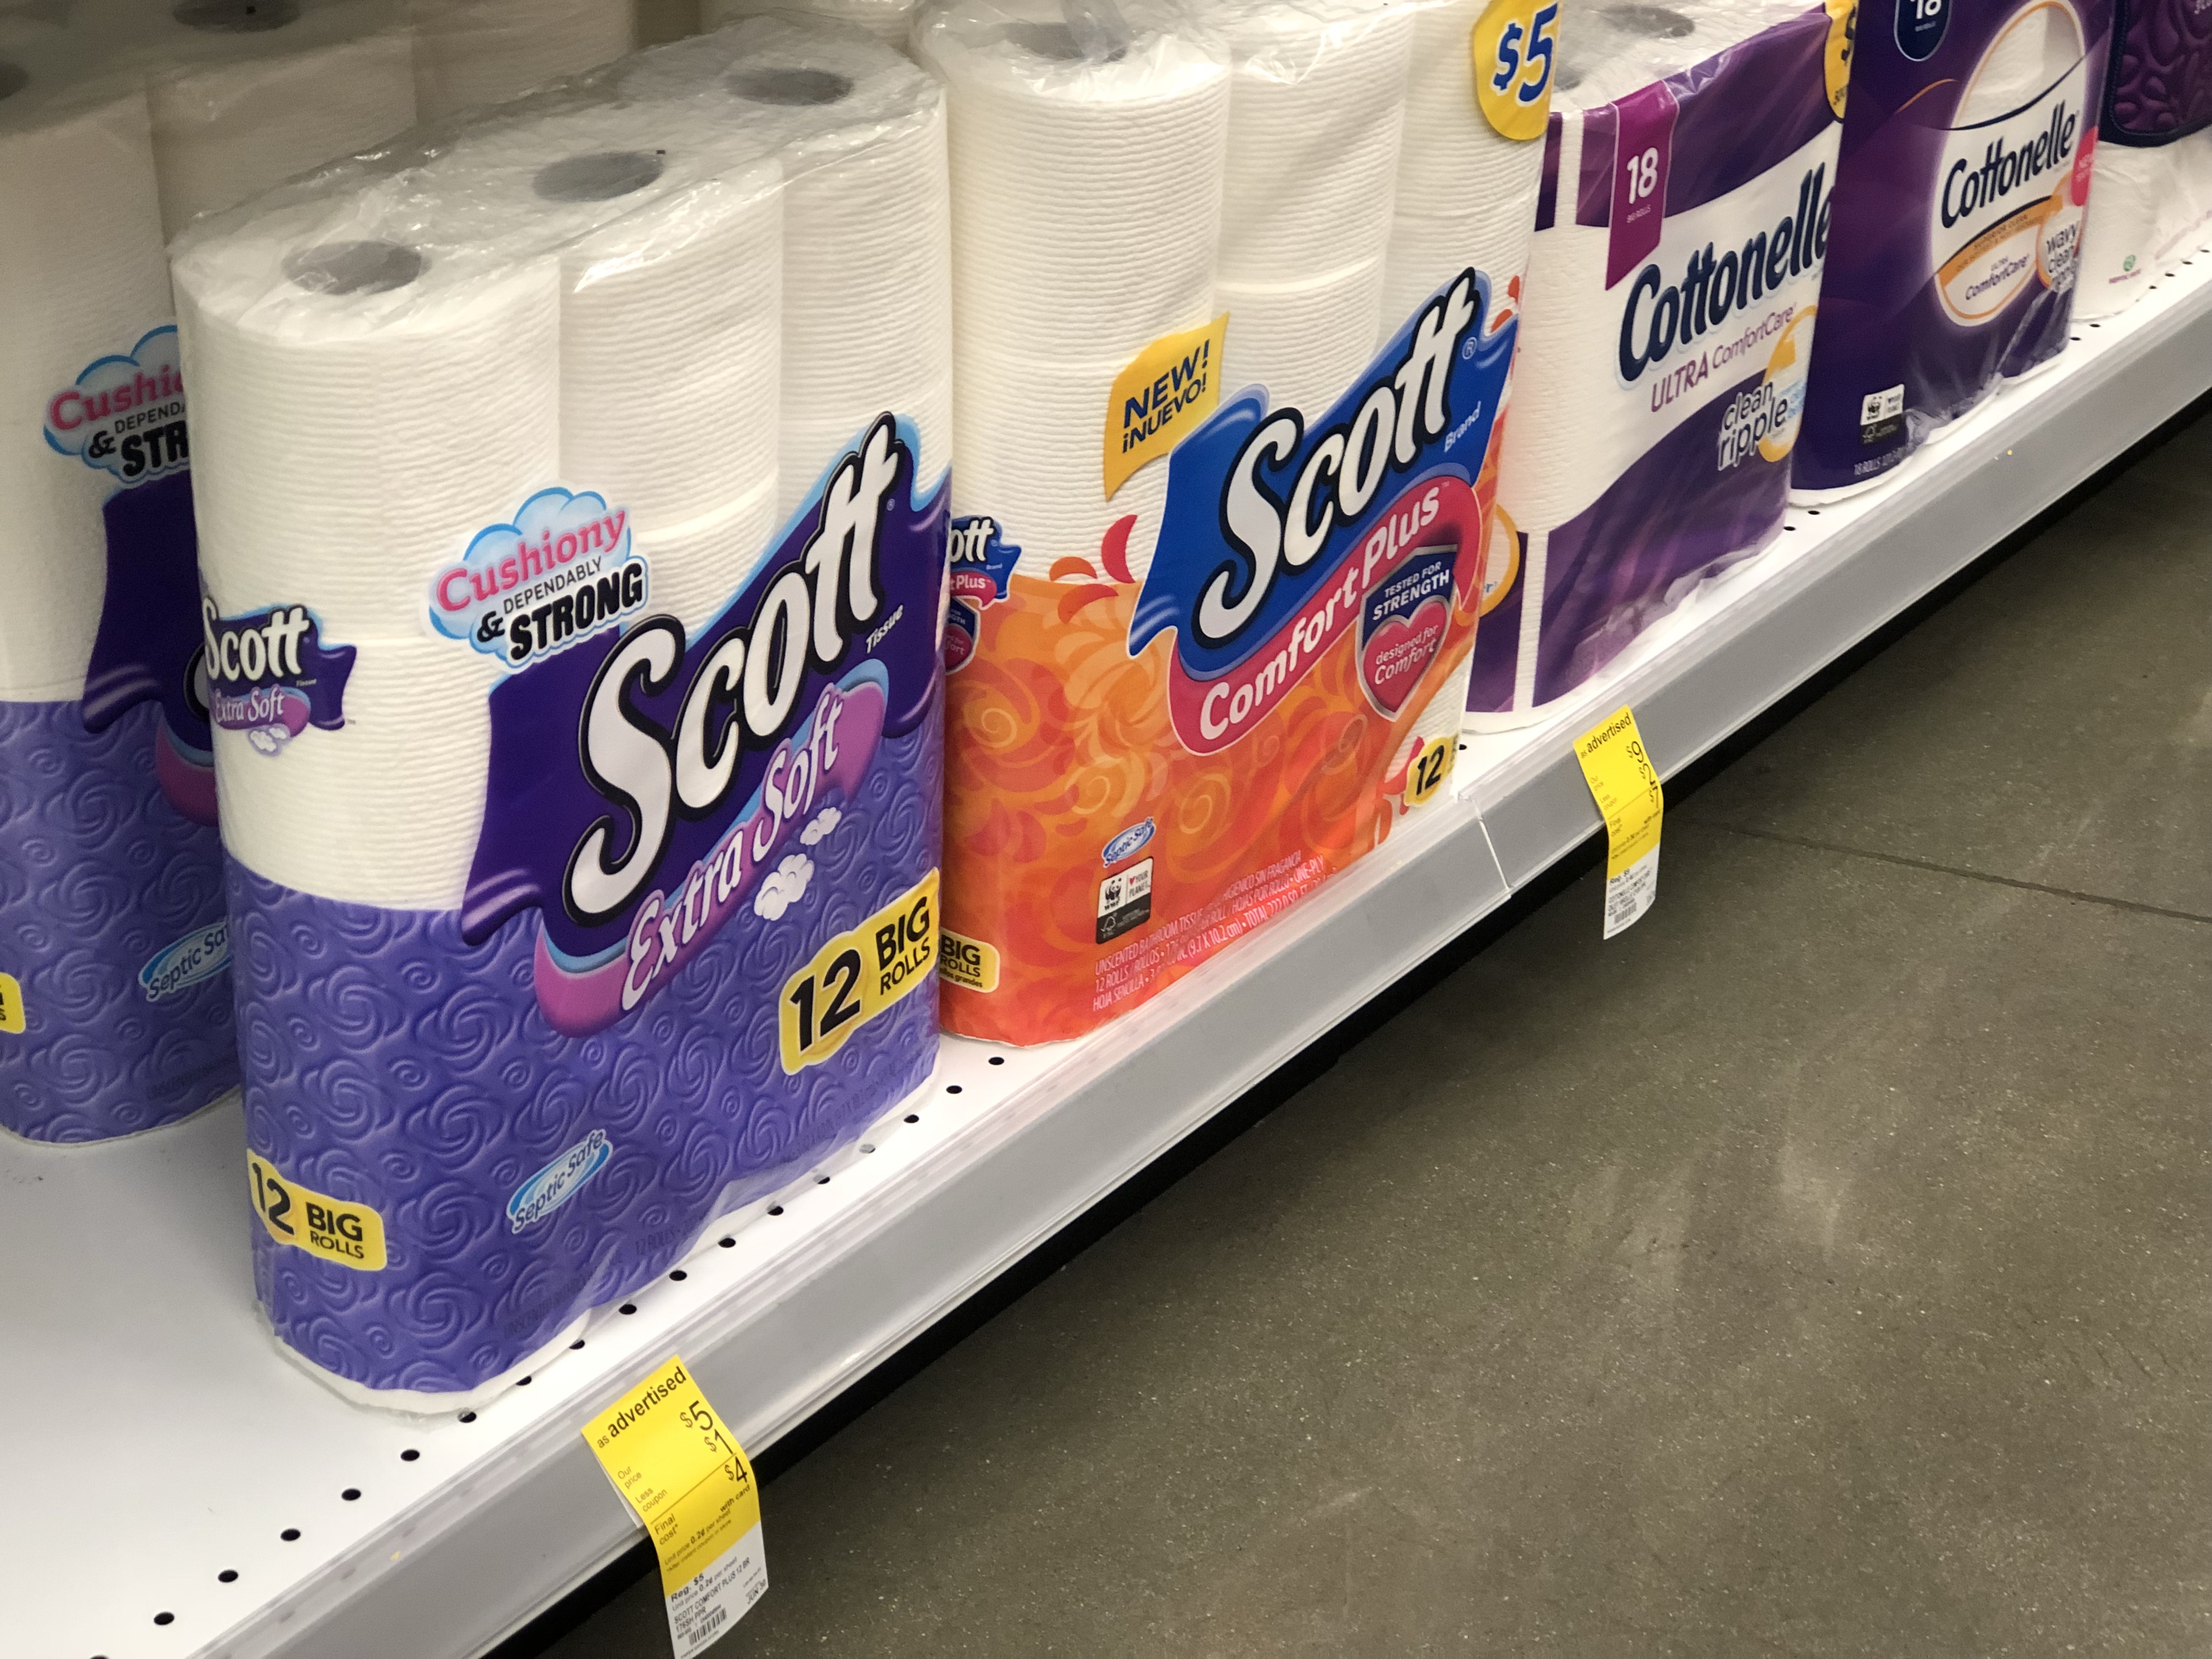 New Scott Bath Tissue Coupon = Just 3.45 for 12 Rolls at